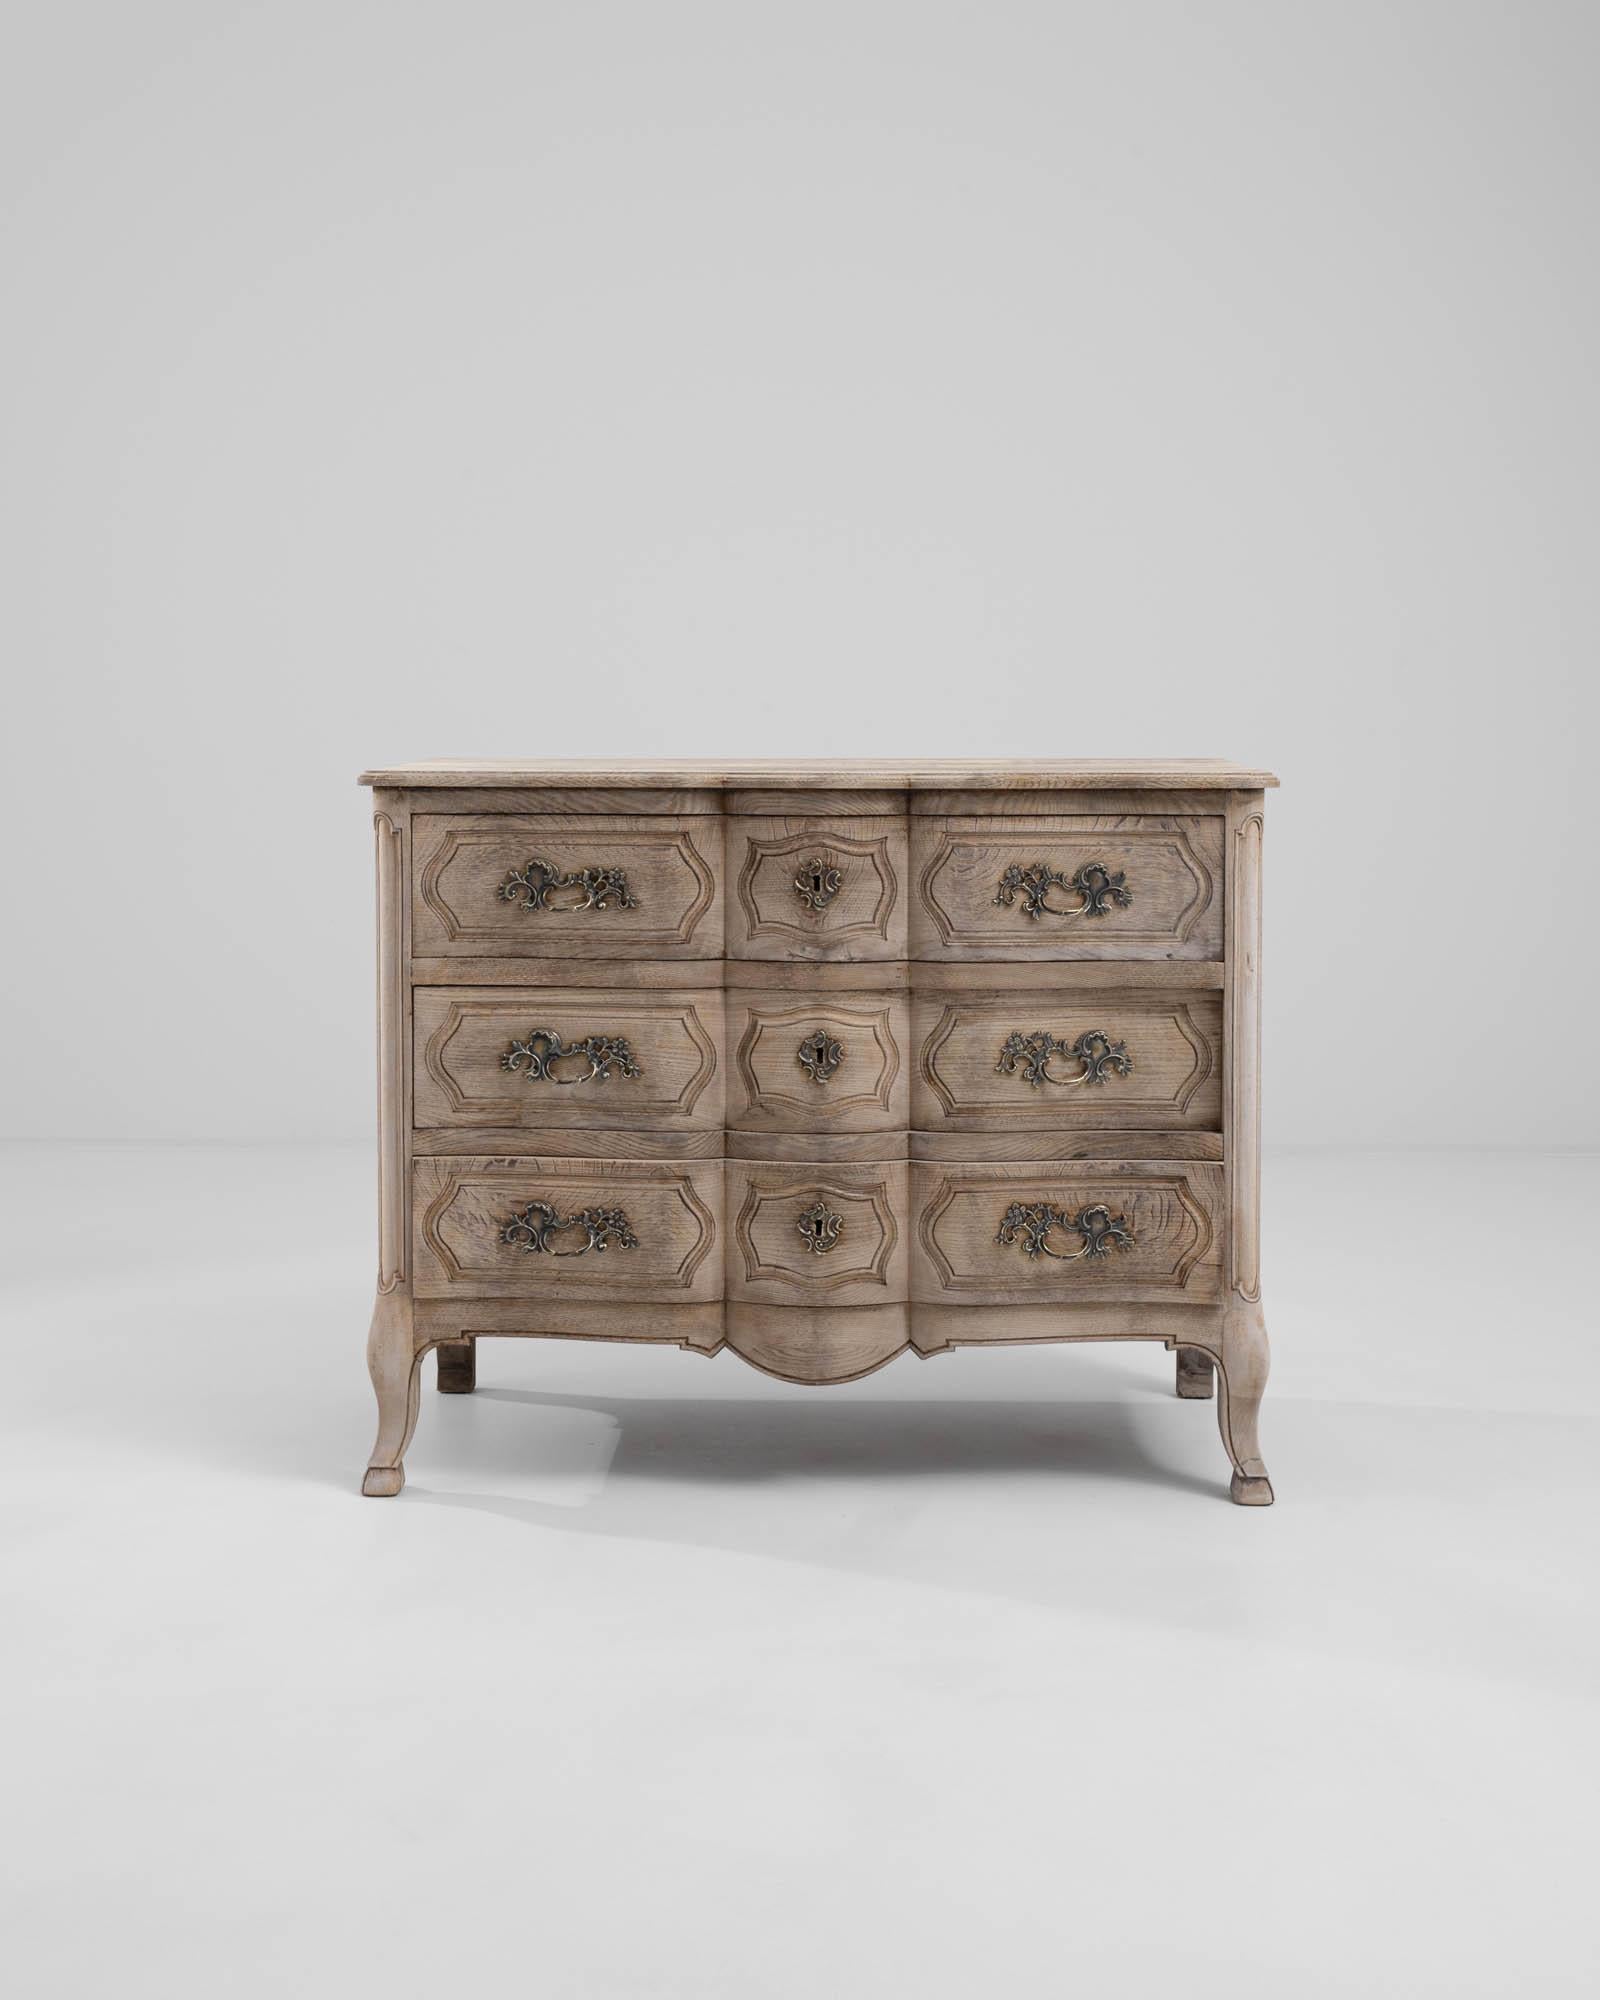 A wooden chest of drawers made in early 20th century France. The elegantly shaped, cast metal drawer pulls and key slots that adorn the front-facing sides of this exquisite chest exude a flair for panache, situated within an otherwise restrained and